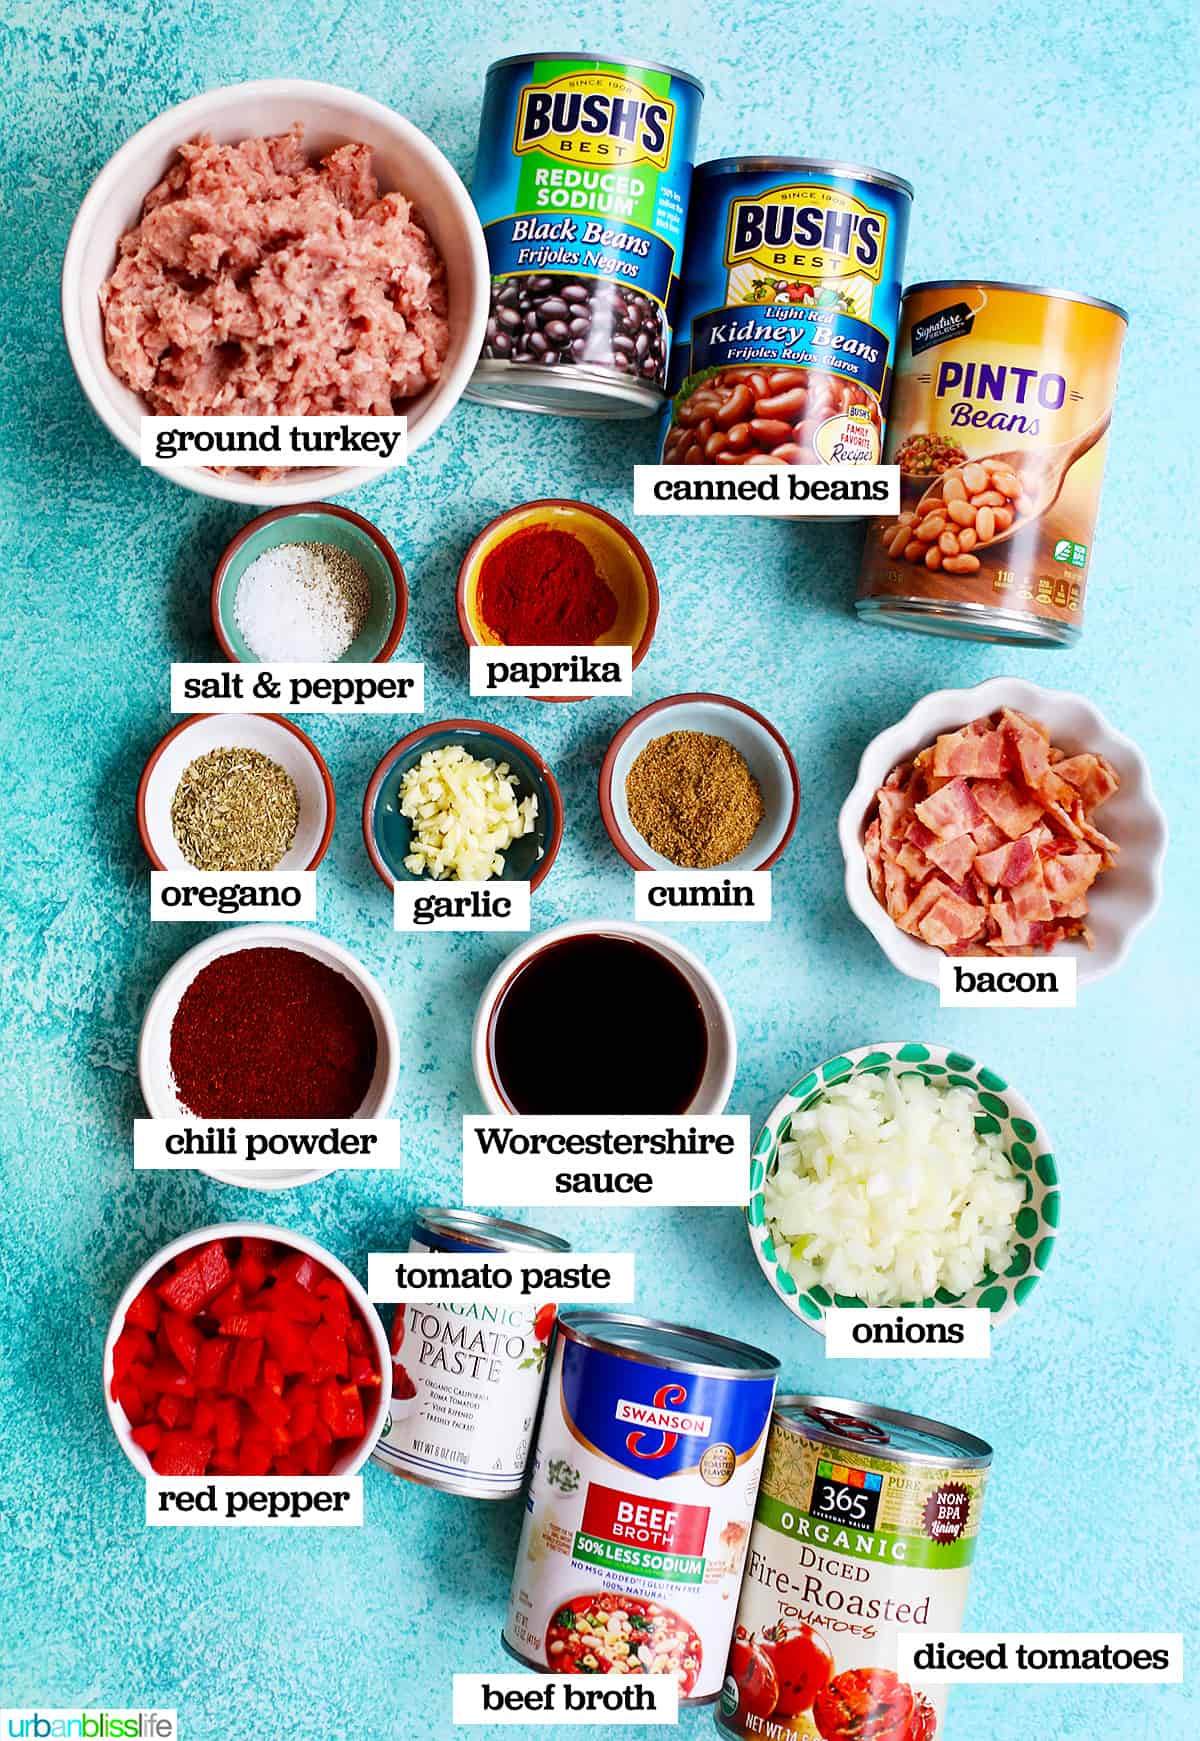 ingrdients to make instant pot chili on top of a bright blue background.